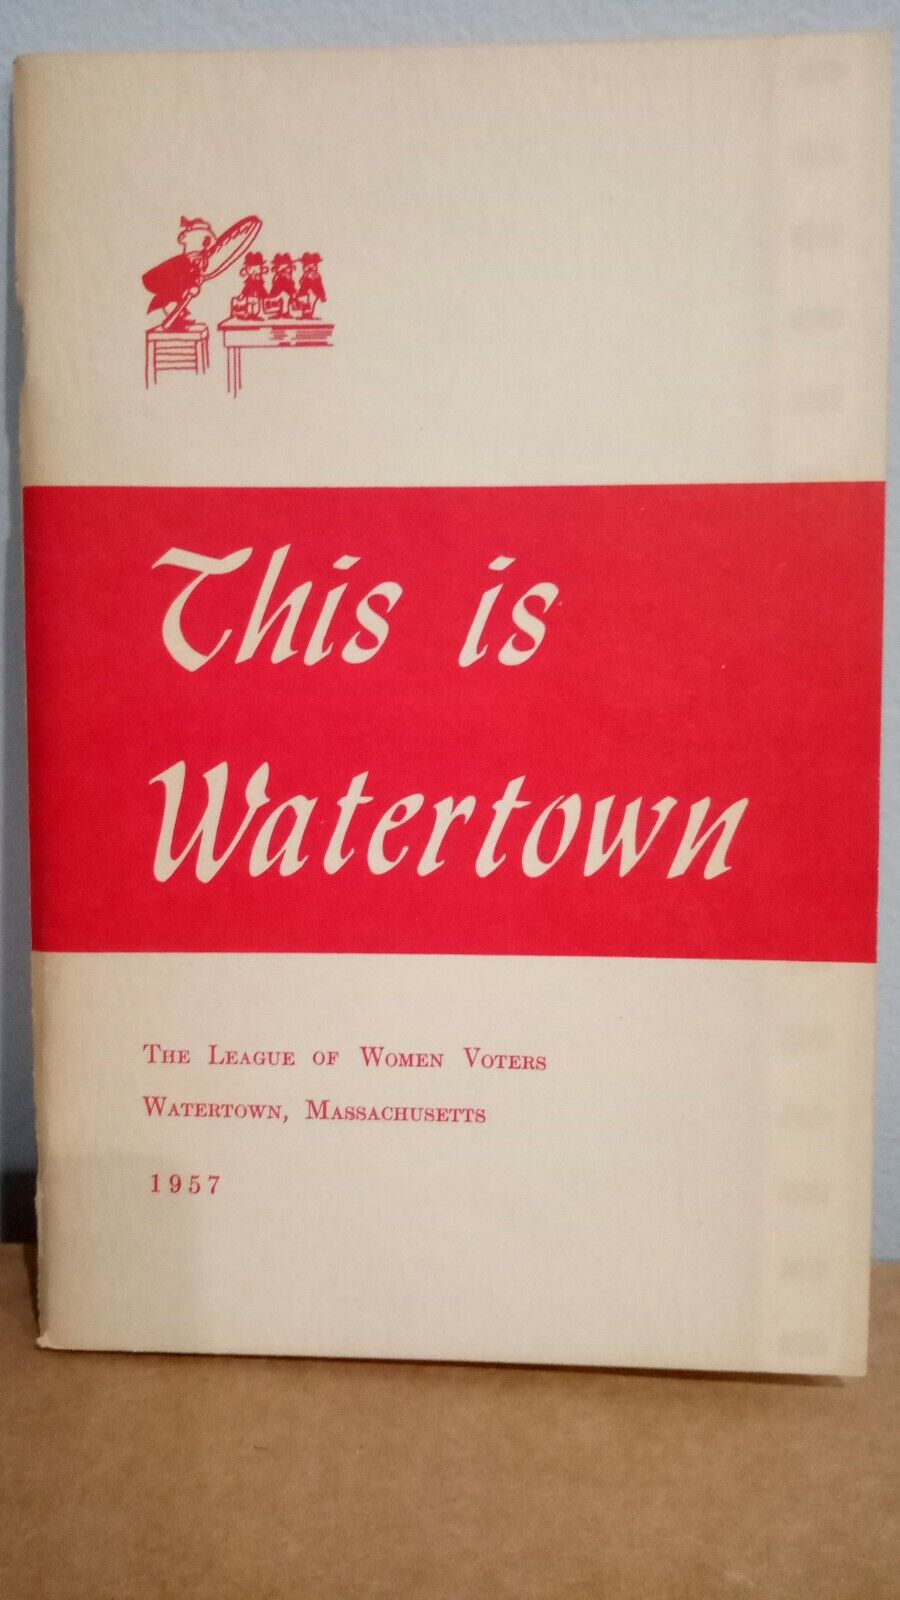 1957 Booklet This is Watertown by The League of Women Voters Watertown, MA